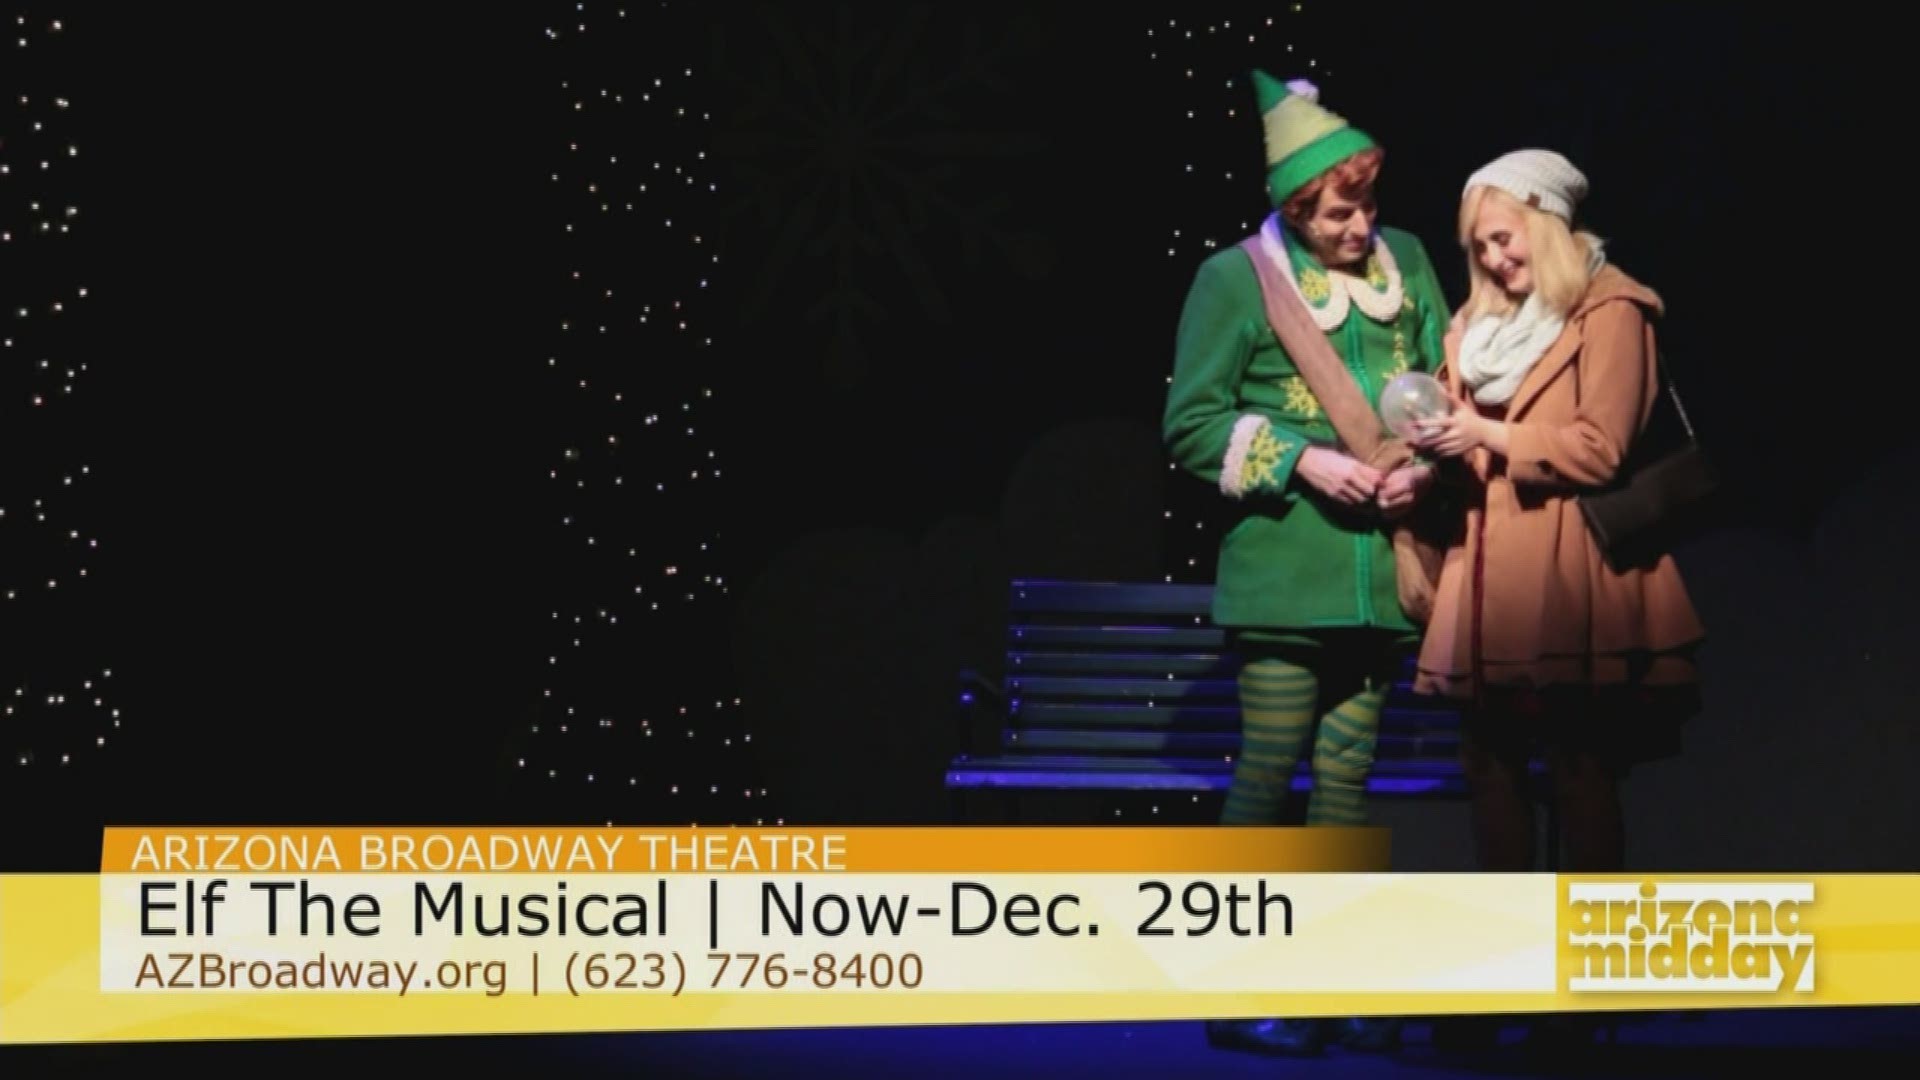 From the big screen to the stage, Jan has our sneak peek at Arizona Broadway Theatre's Elf The Musical!